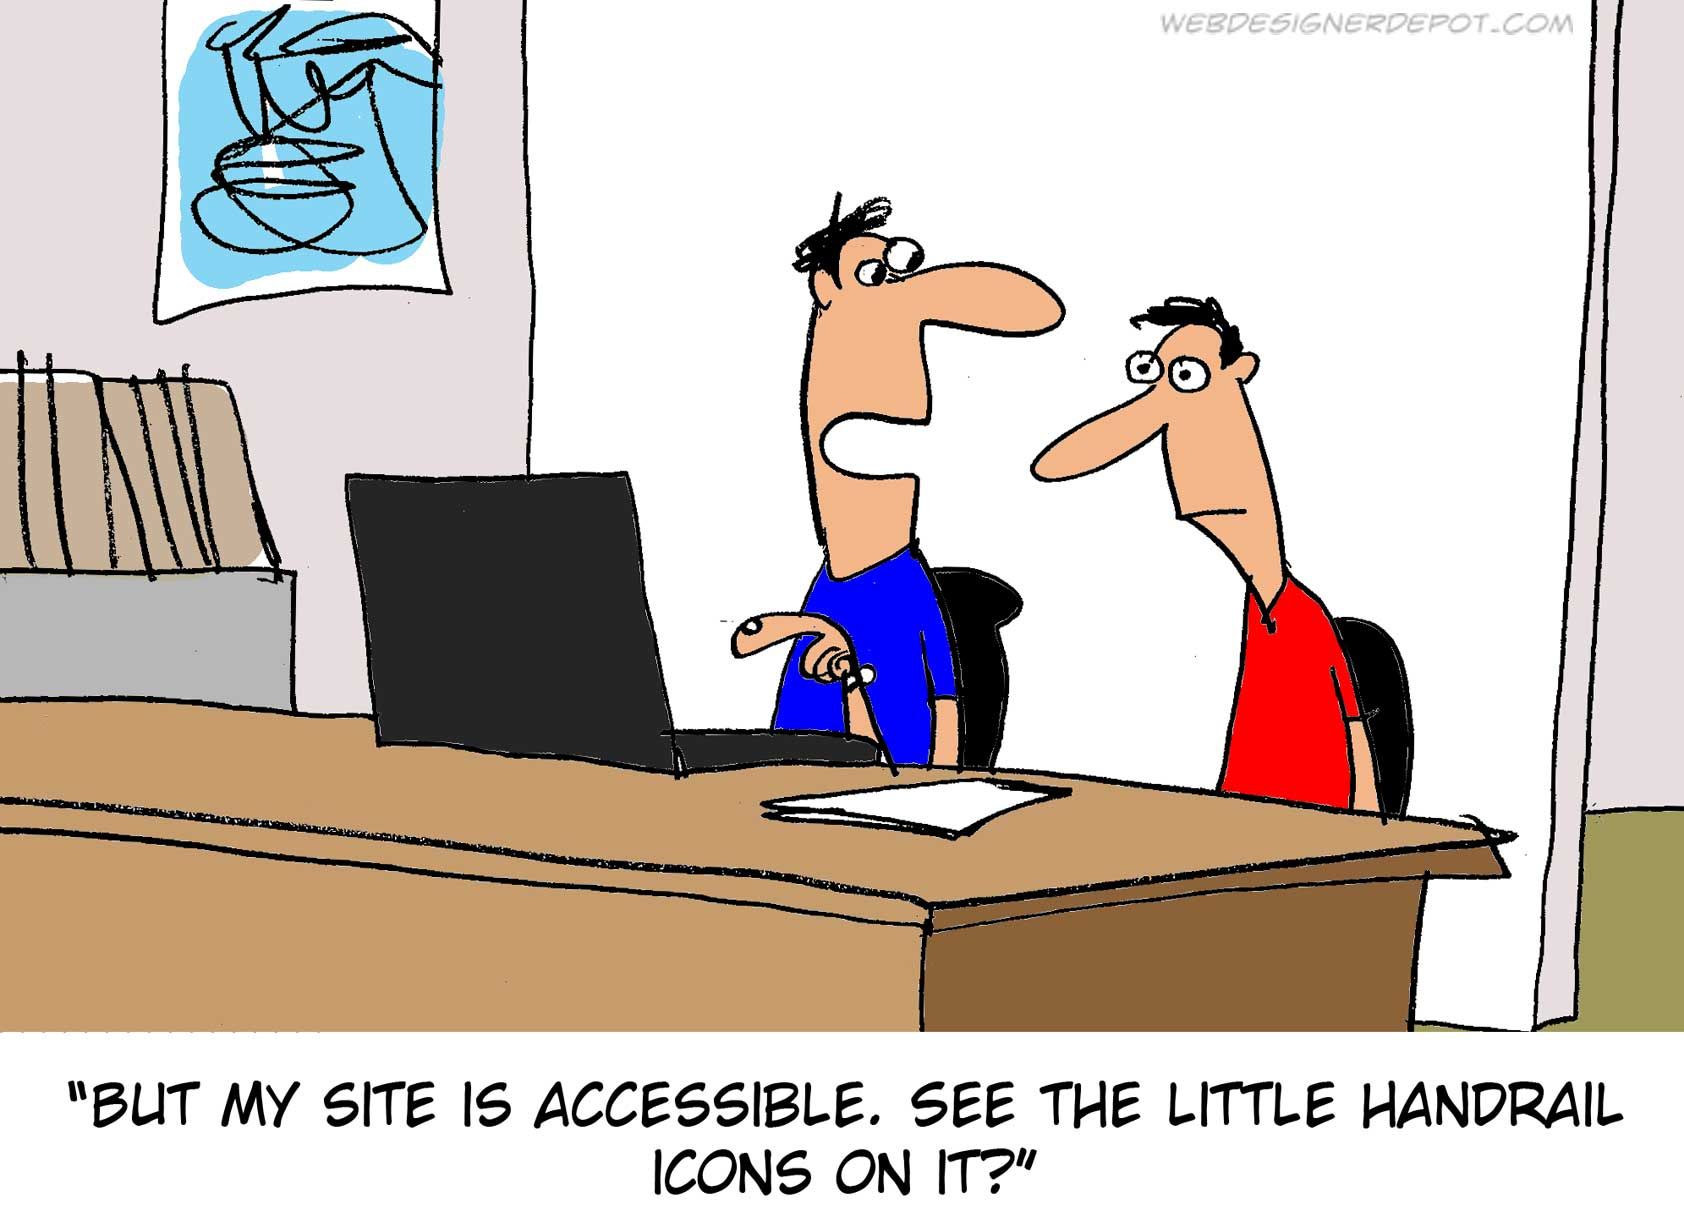 Cartoon of 2 men in front of computer. The caption says: "But my website is accessible. See the little handrail icons on it?"